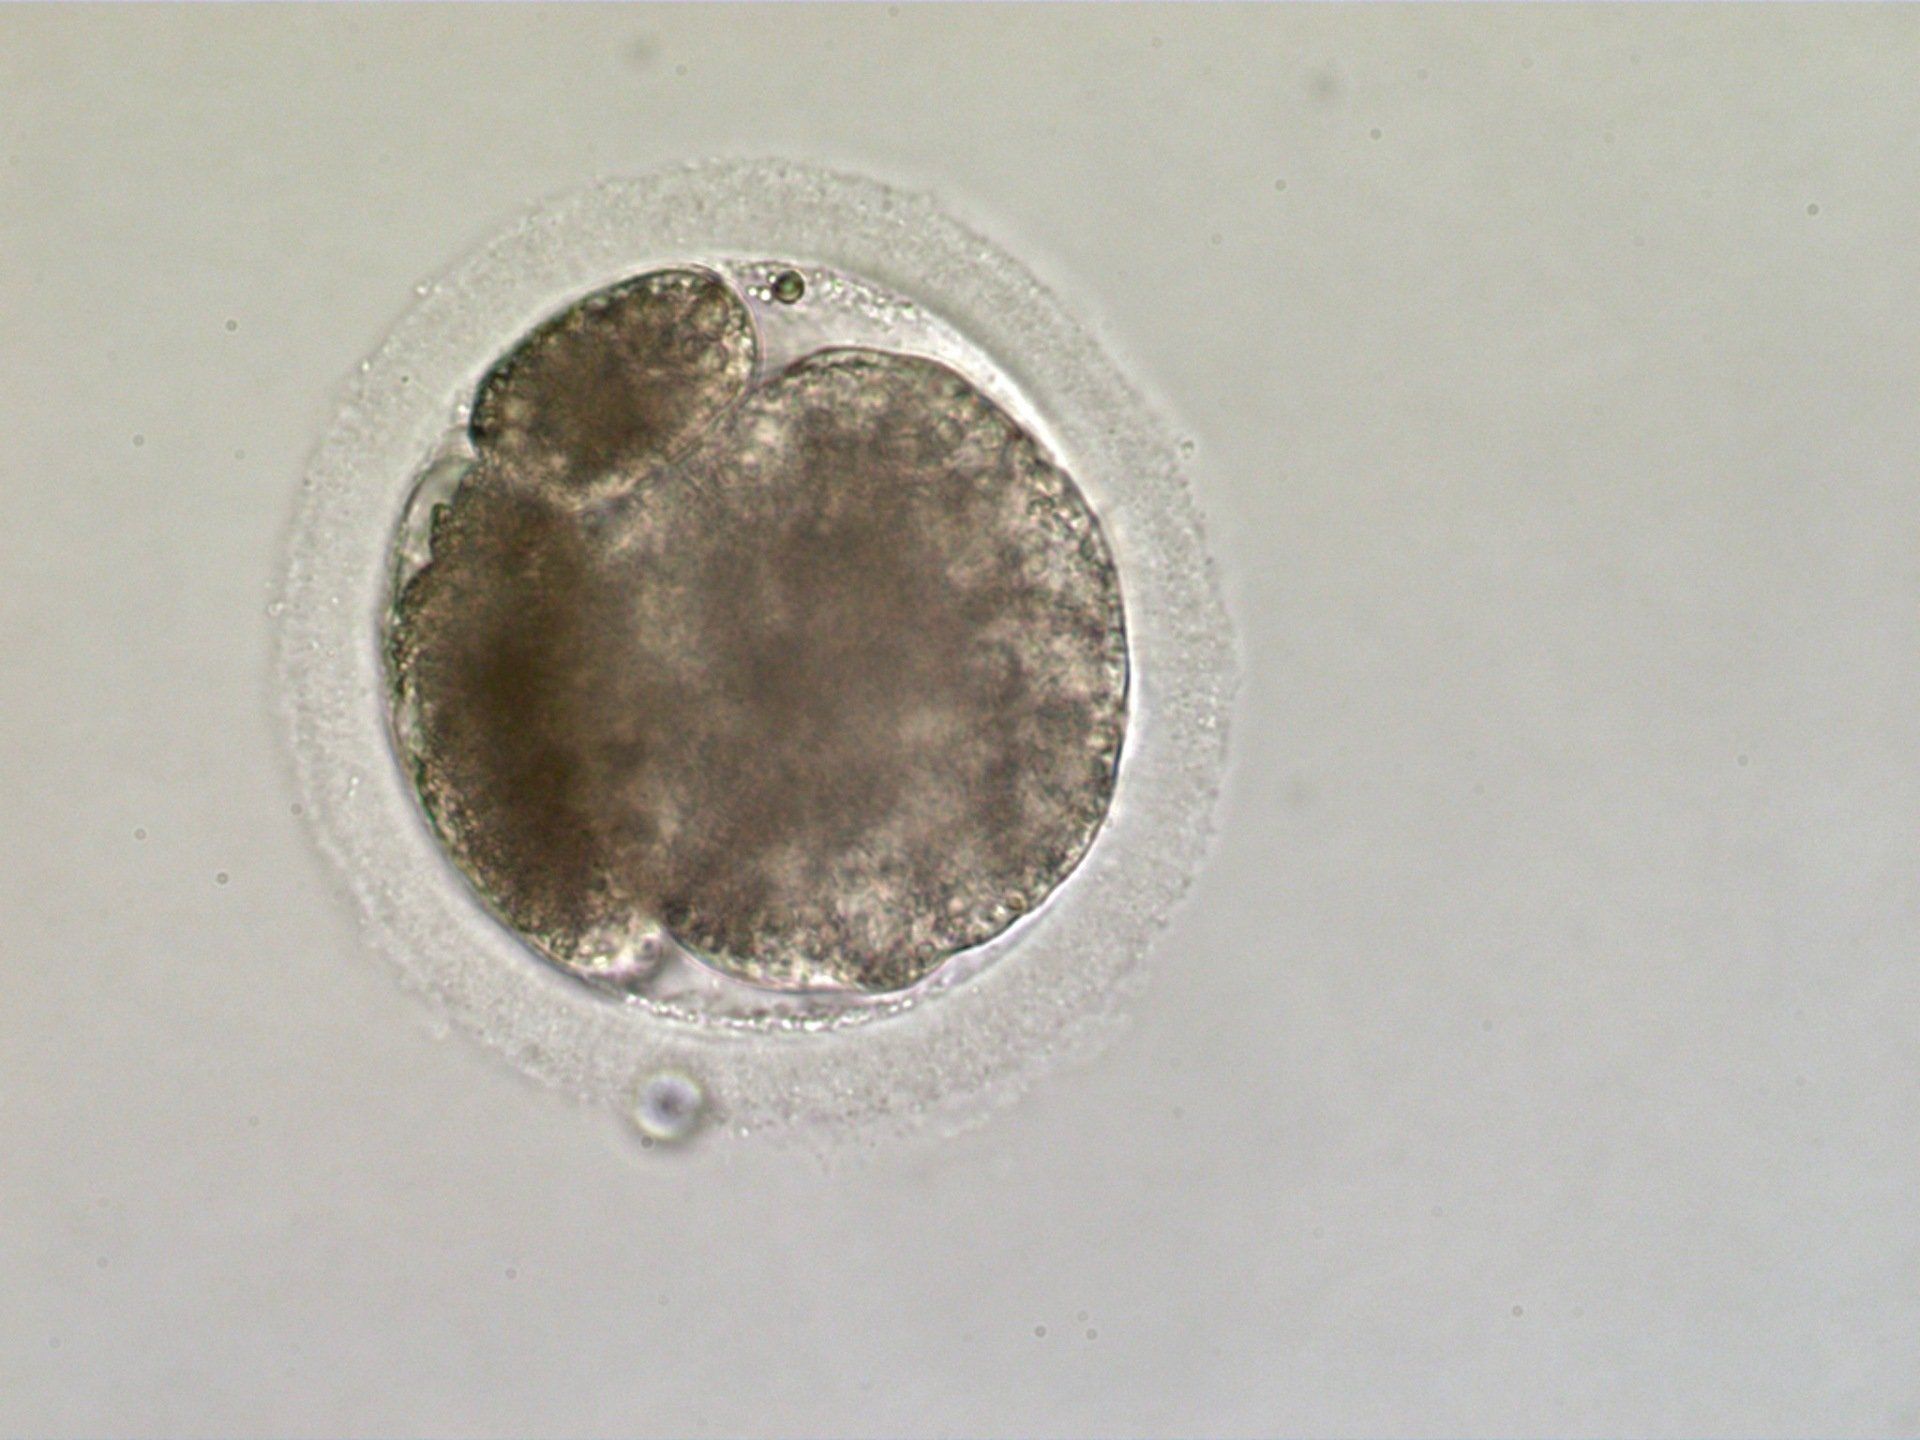 Compact morula, day 5 following ICSI. At about day 5 embryos undergo compaction where the relatively autonomous cells coalesce to become a single tissue-like mass.